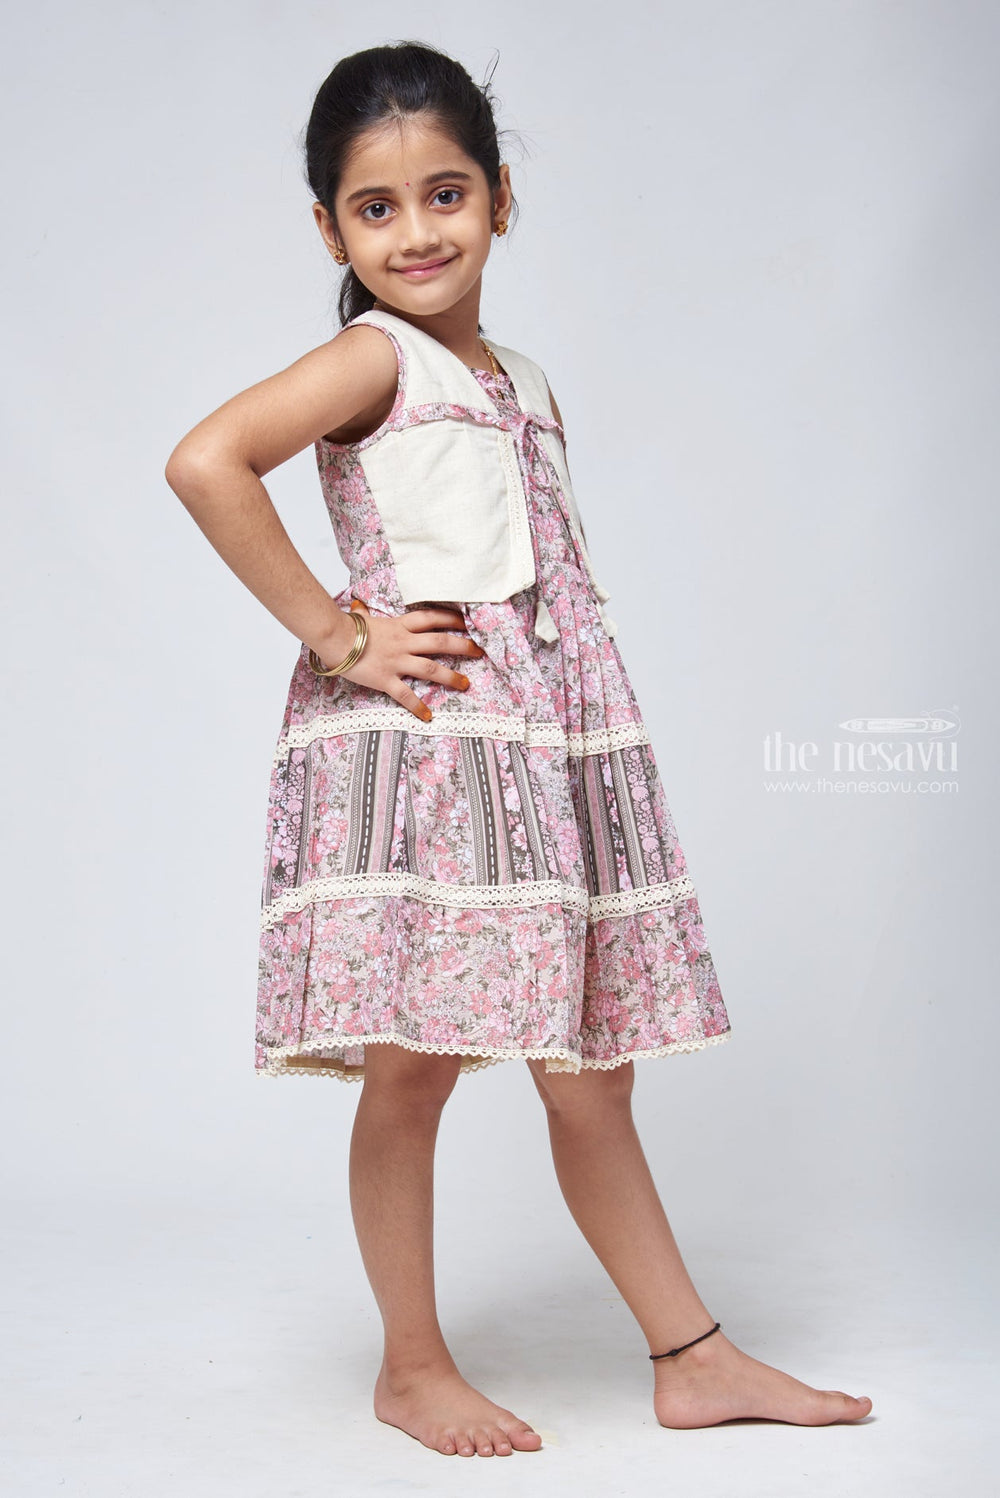 The Nesavu Girls Cotton Frock Chic Half White Floral Frock - Stylish Girls Cotton Dress Nesavu Cotton Printed Frock | Cotton Frocks For Daily Wear | The Nesavu